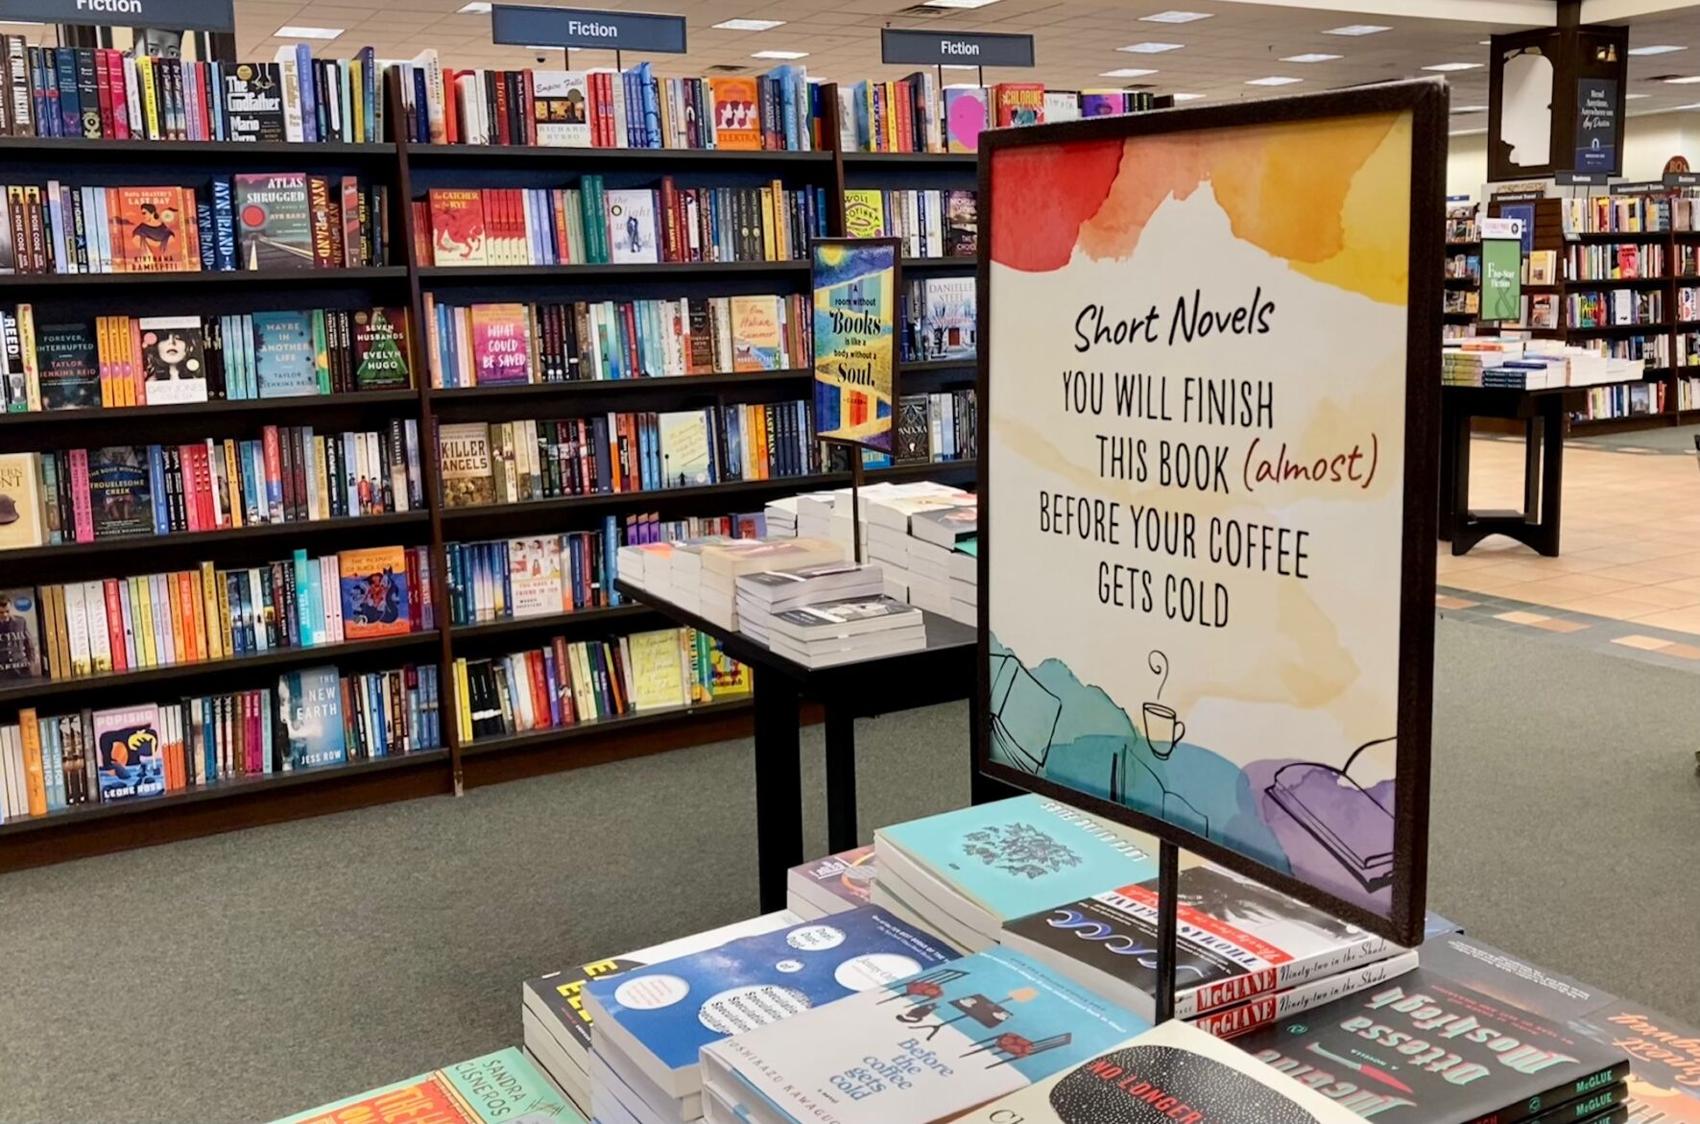 Tucson Barnes & Noble stores have taken on a local feel